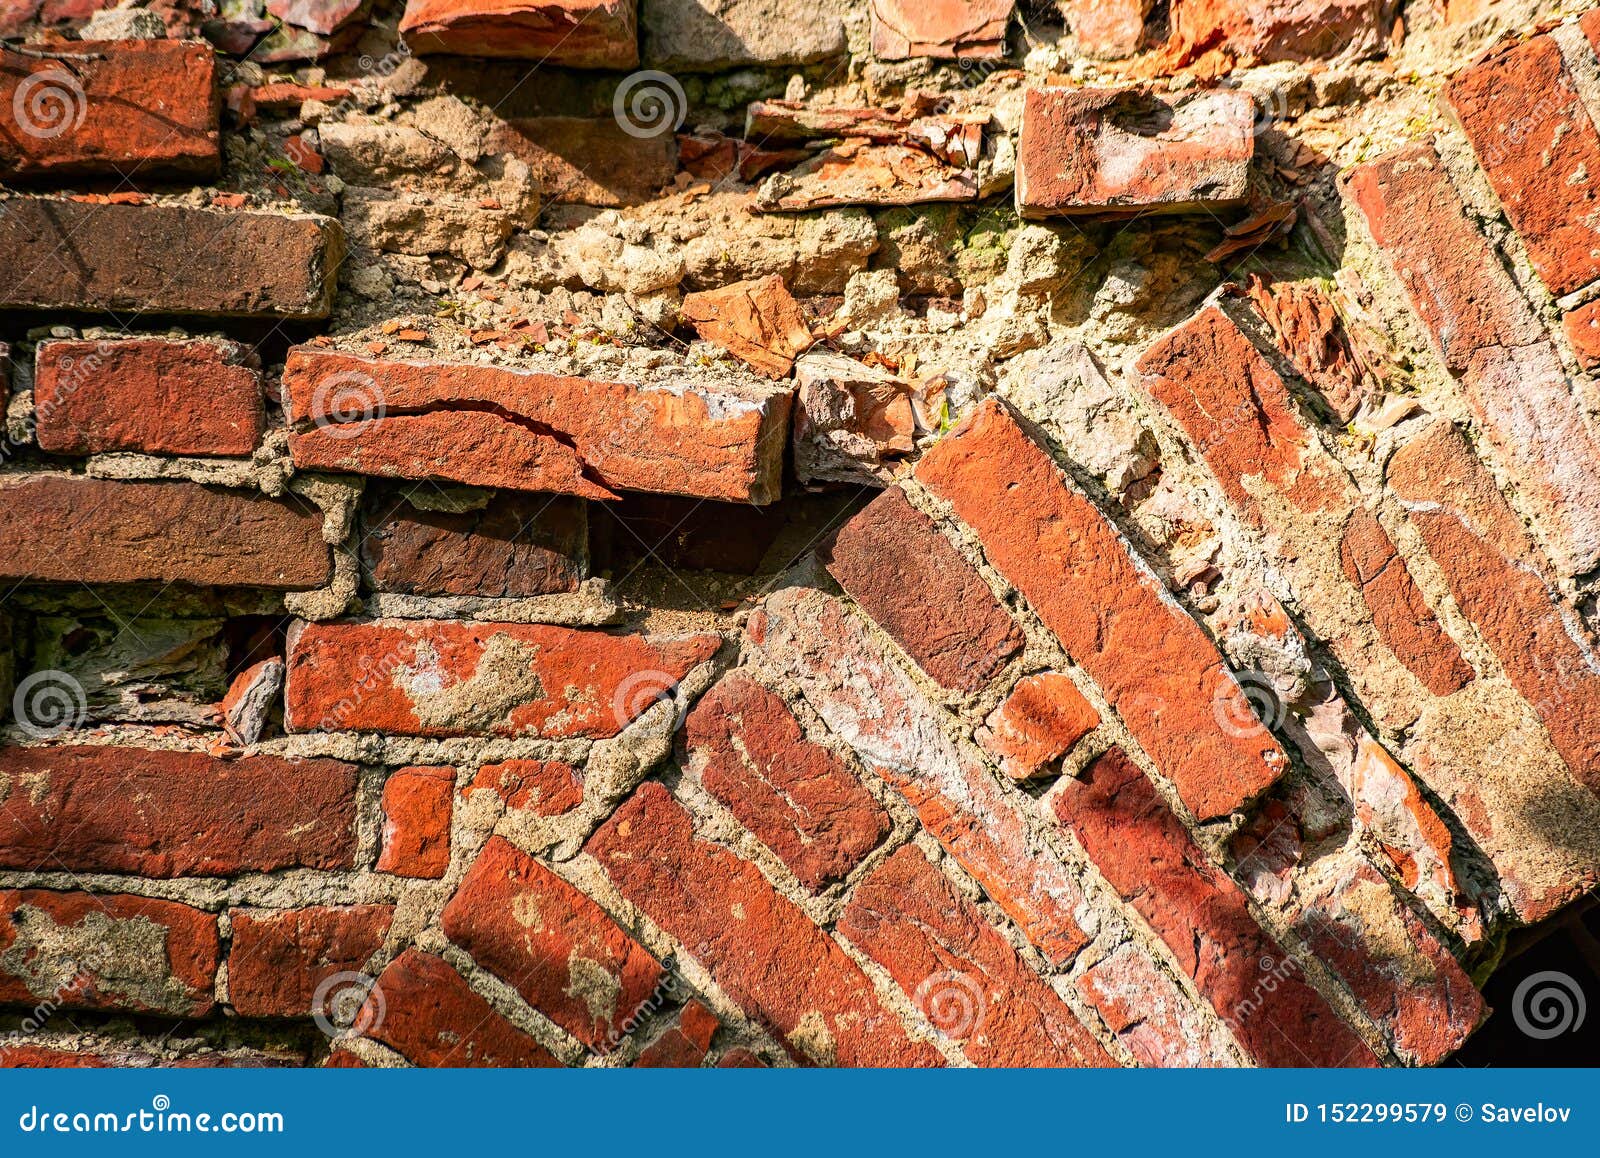 Red Brick Wall With Chipped Pieces Stock Image - Image of stonewall ...